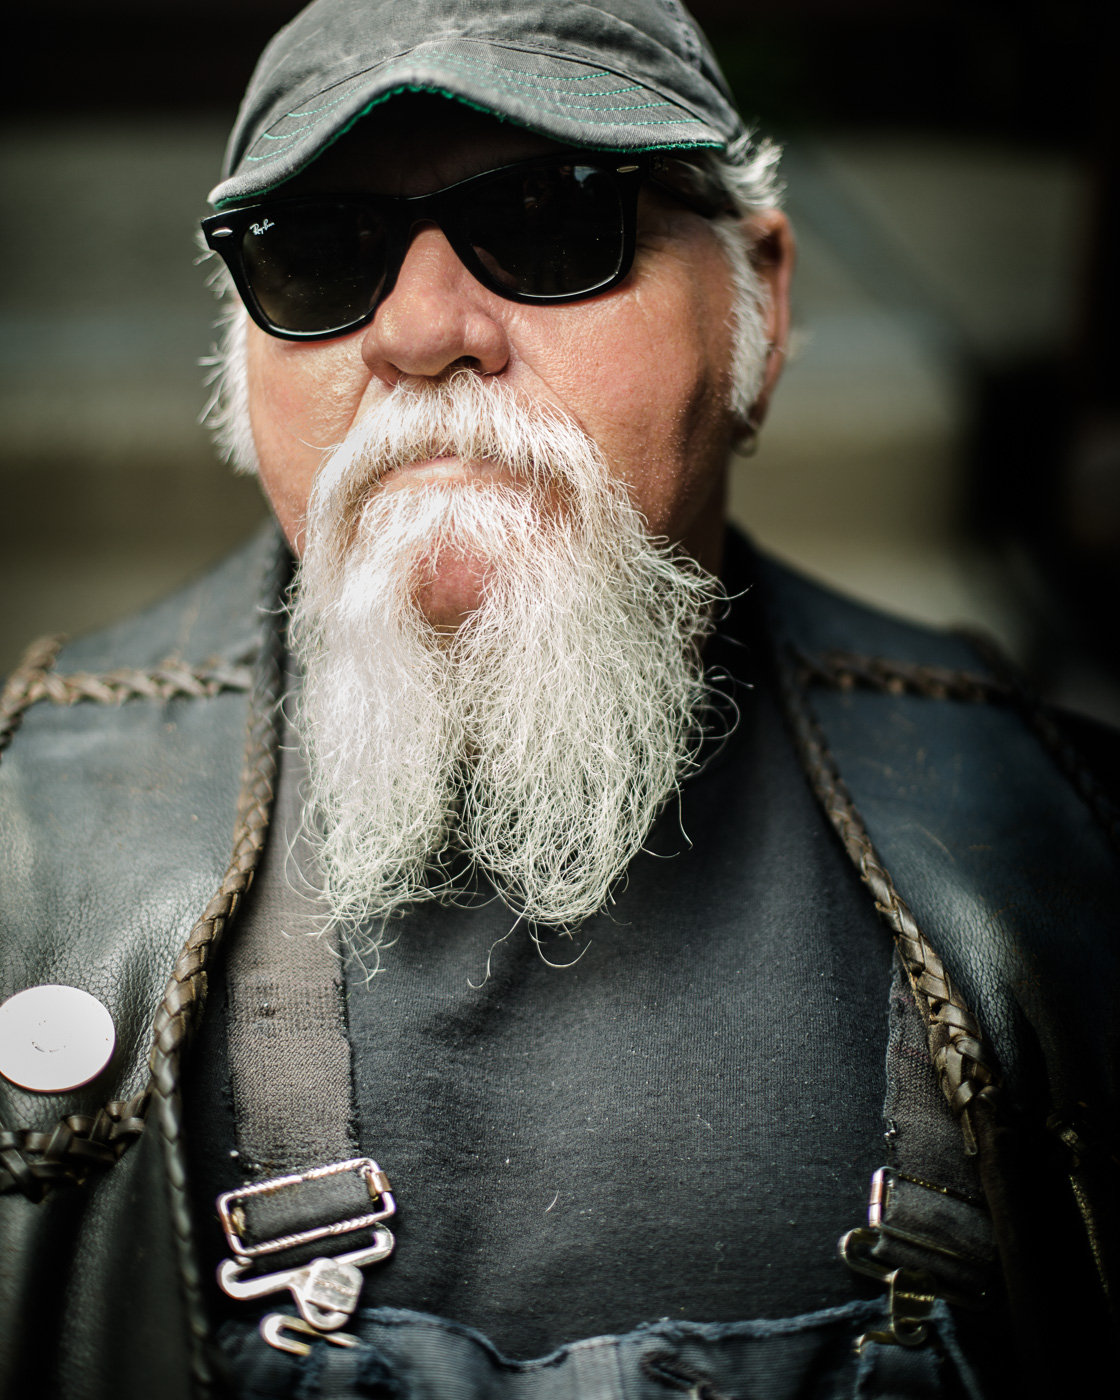 editorial portrait photographer - close up portrait of a biker with sunglasses and grey beard